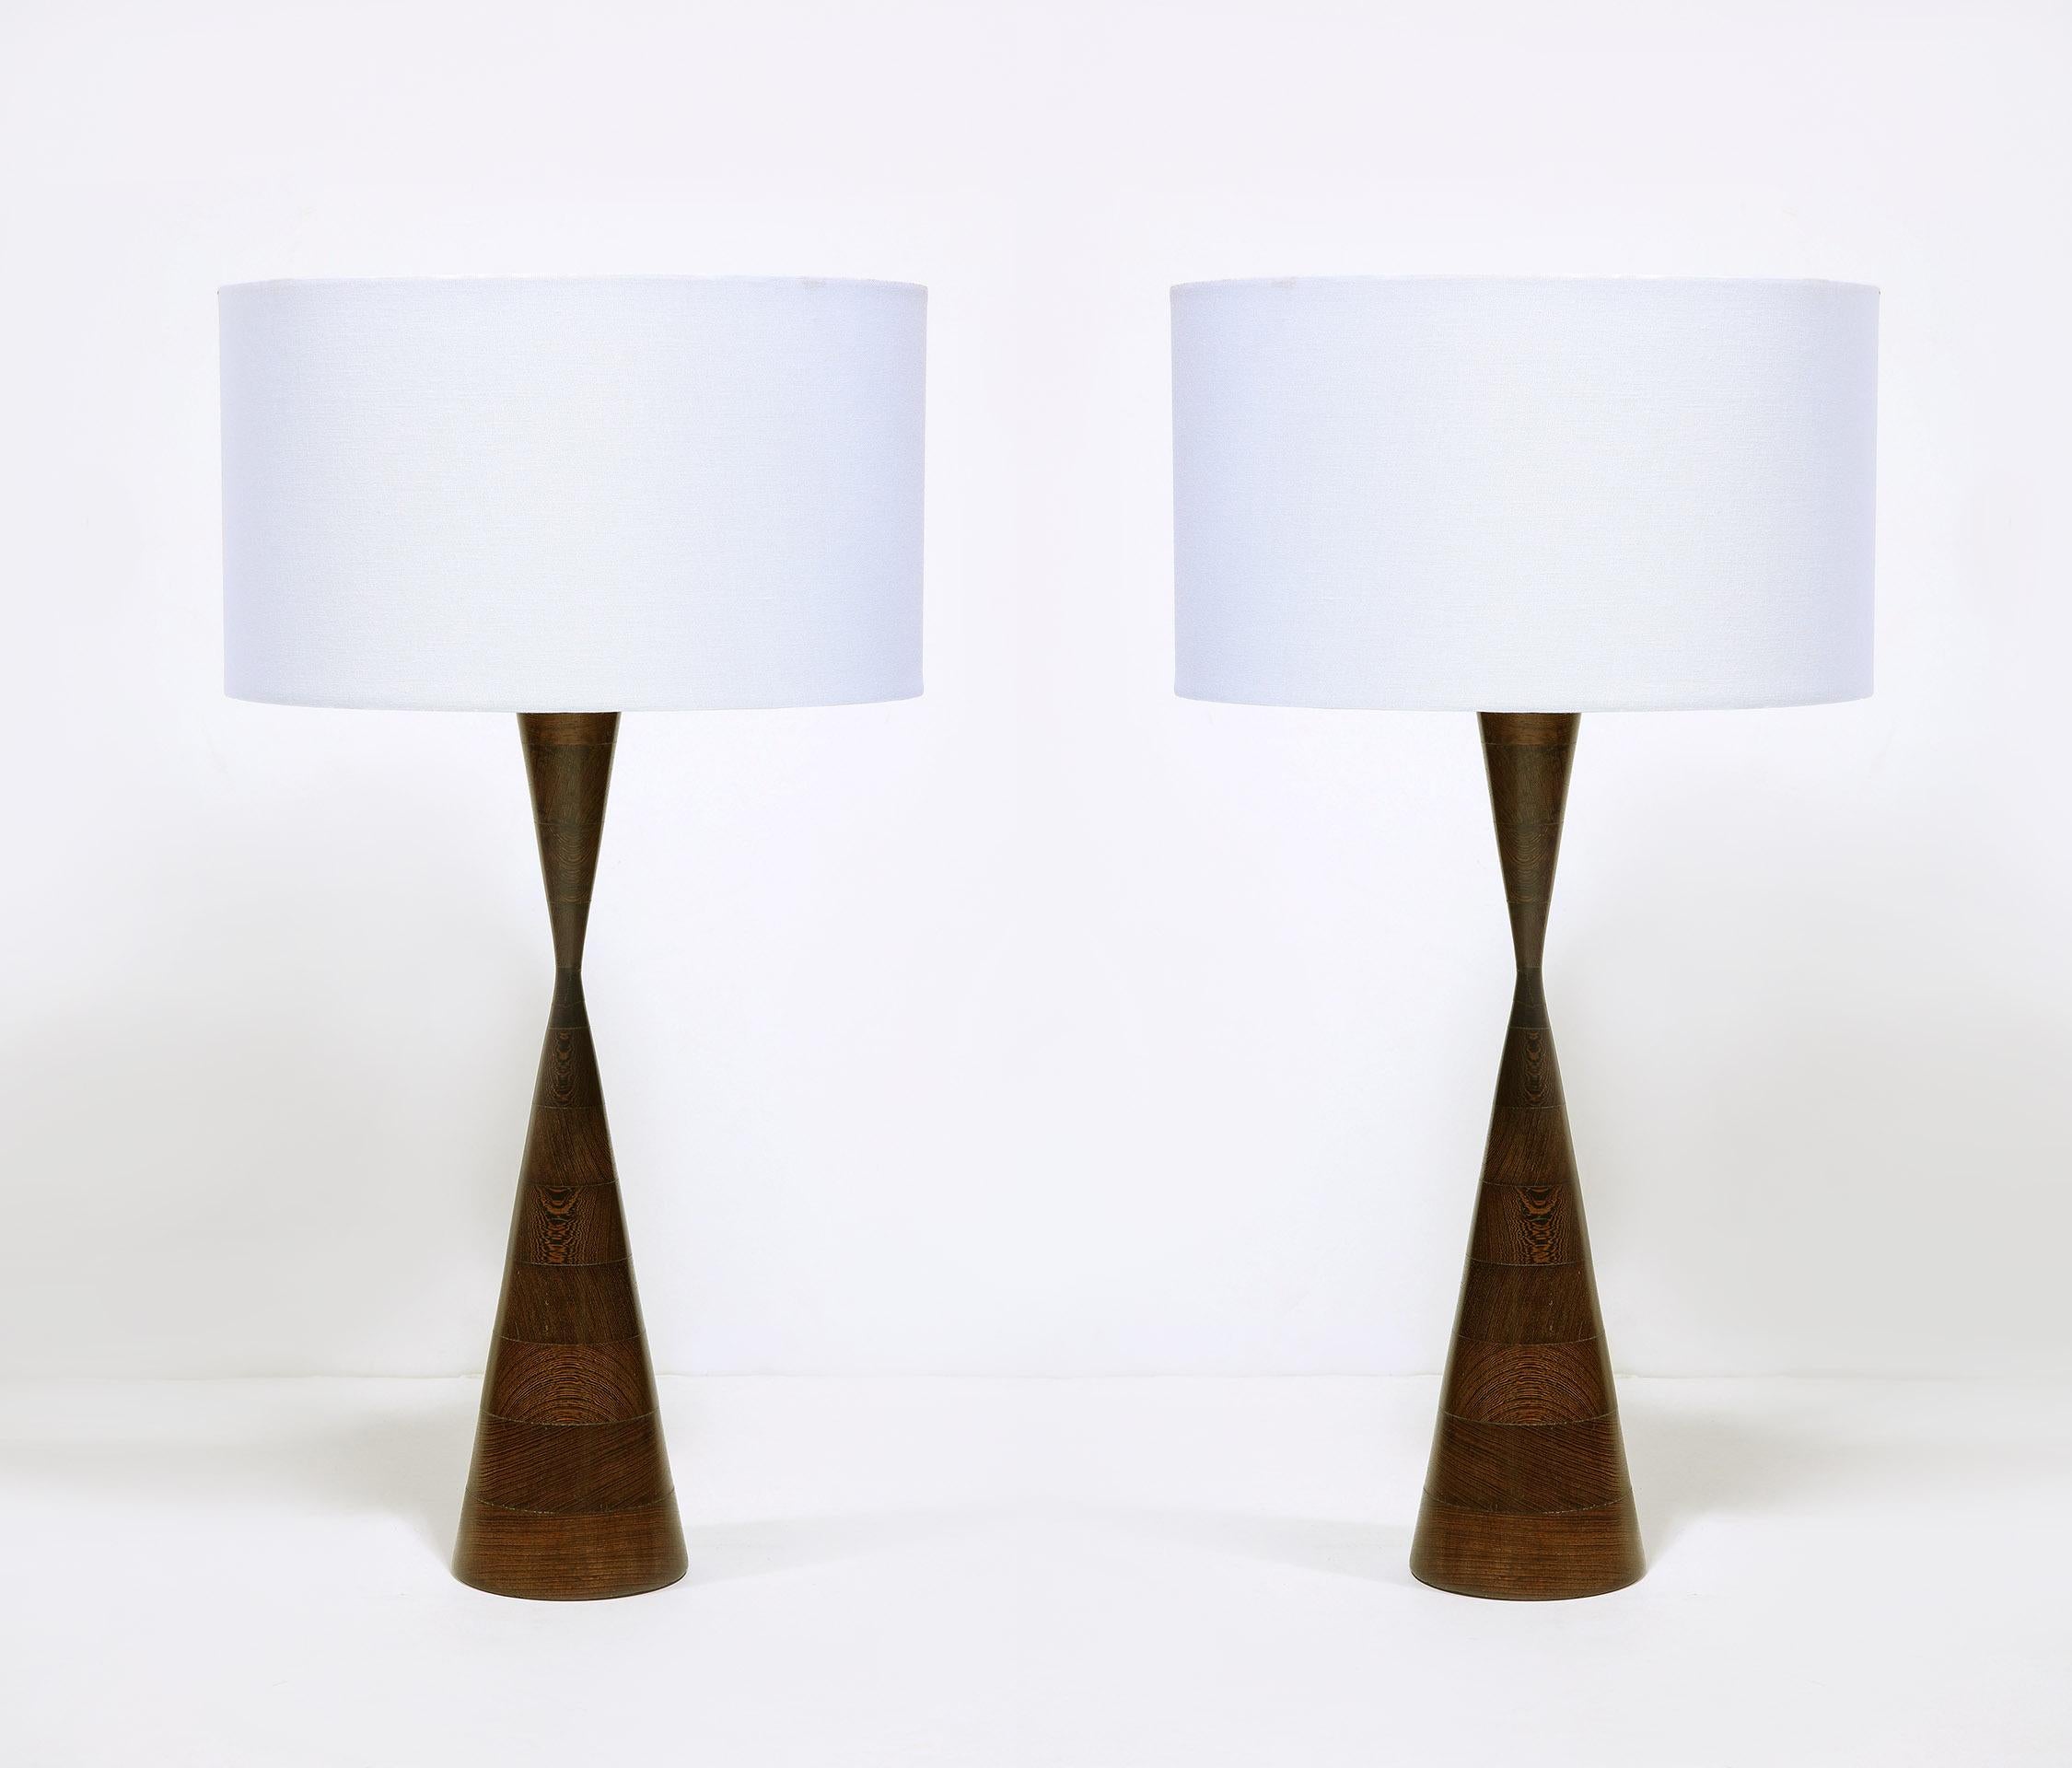 The stacked and turned Wenge wood lamps of unusual design. 
In the style of Phillip Lloyd Powell.